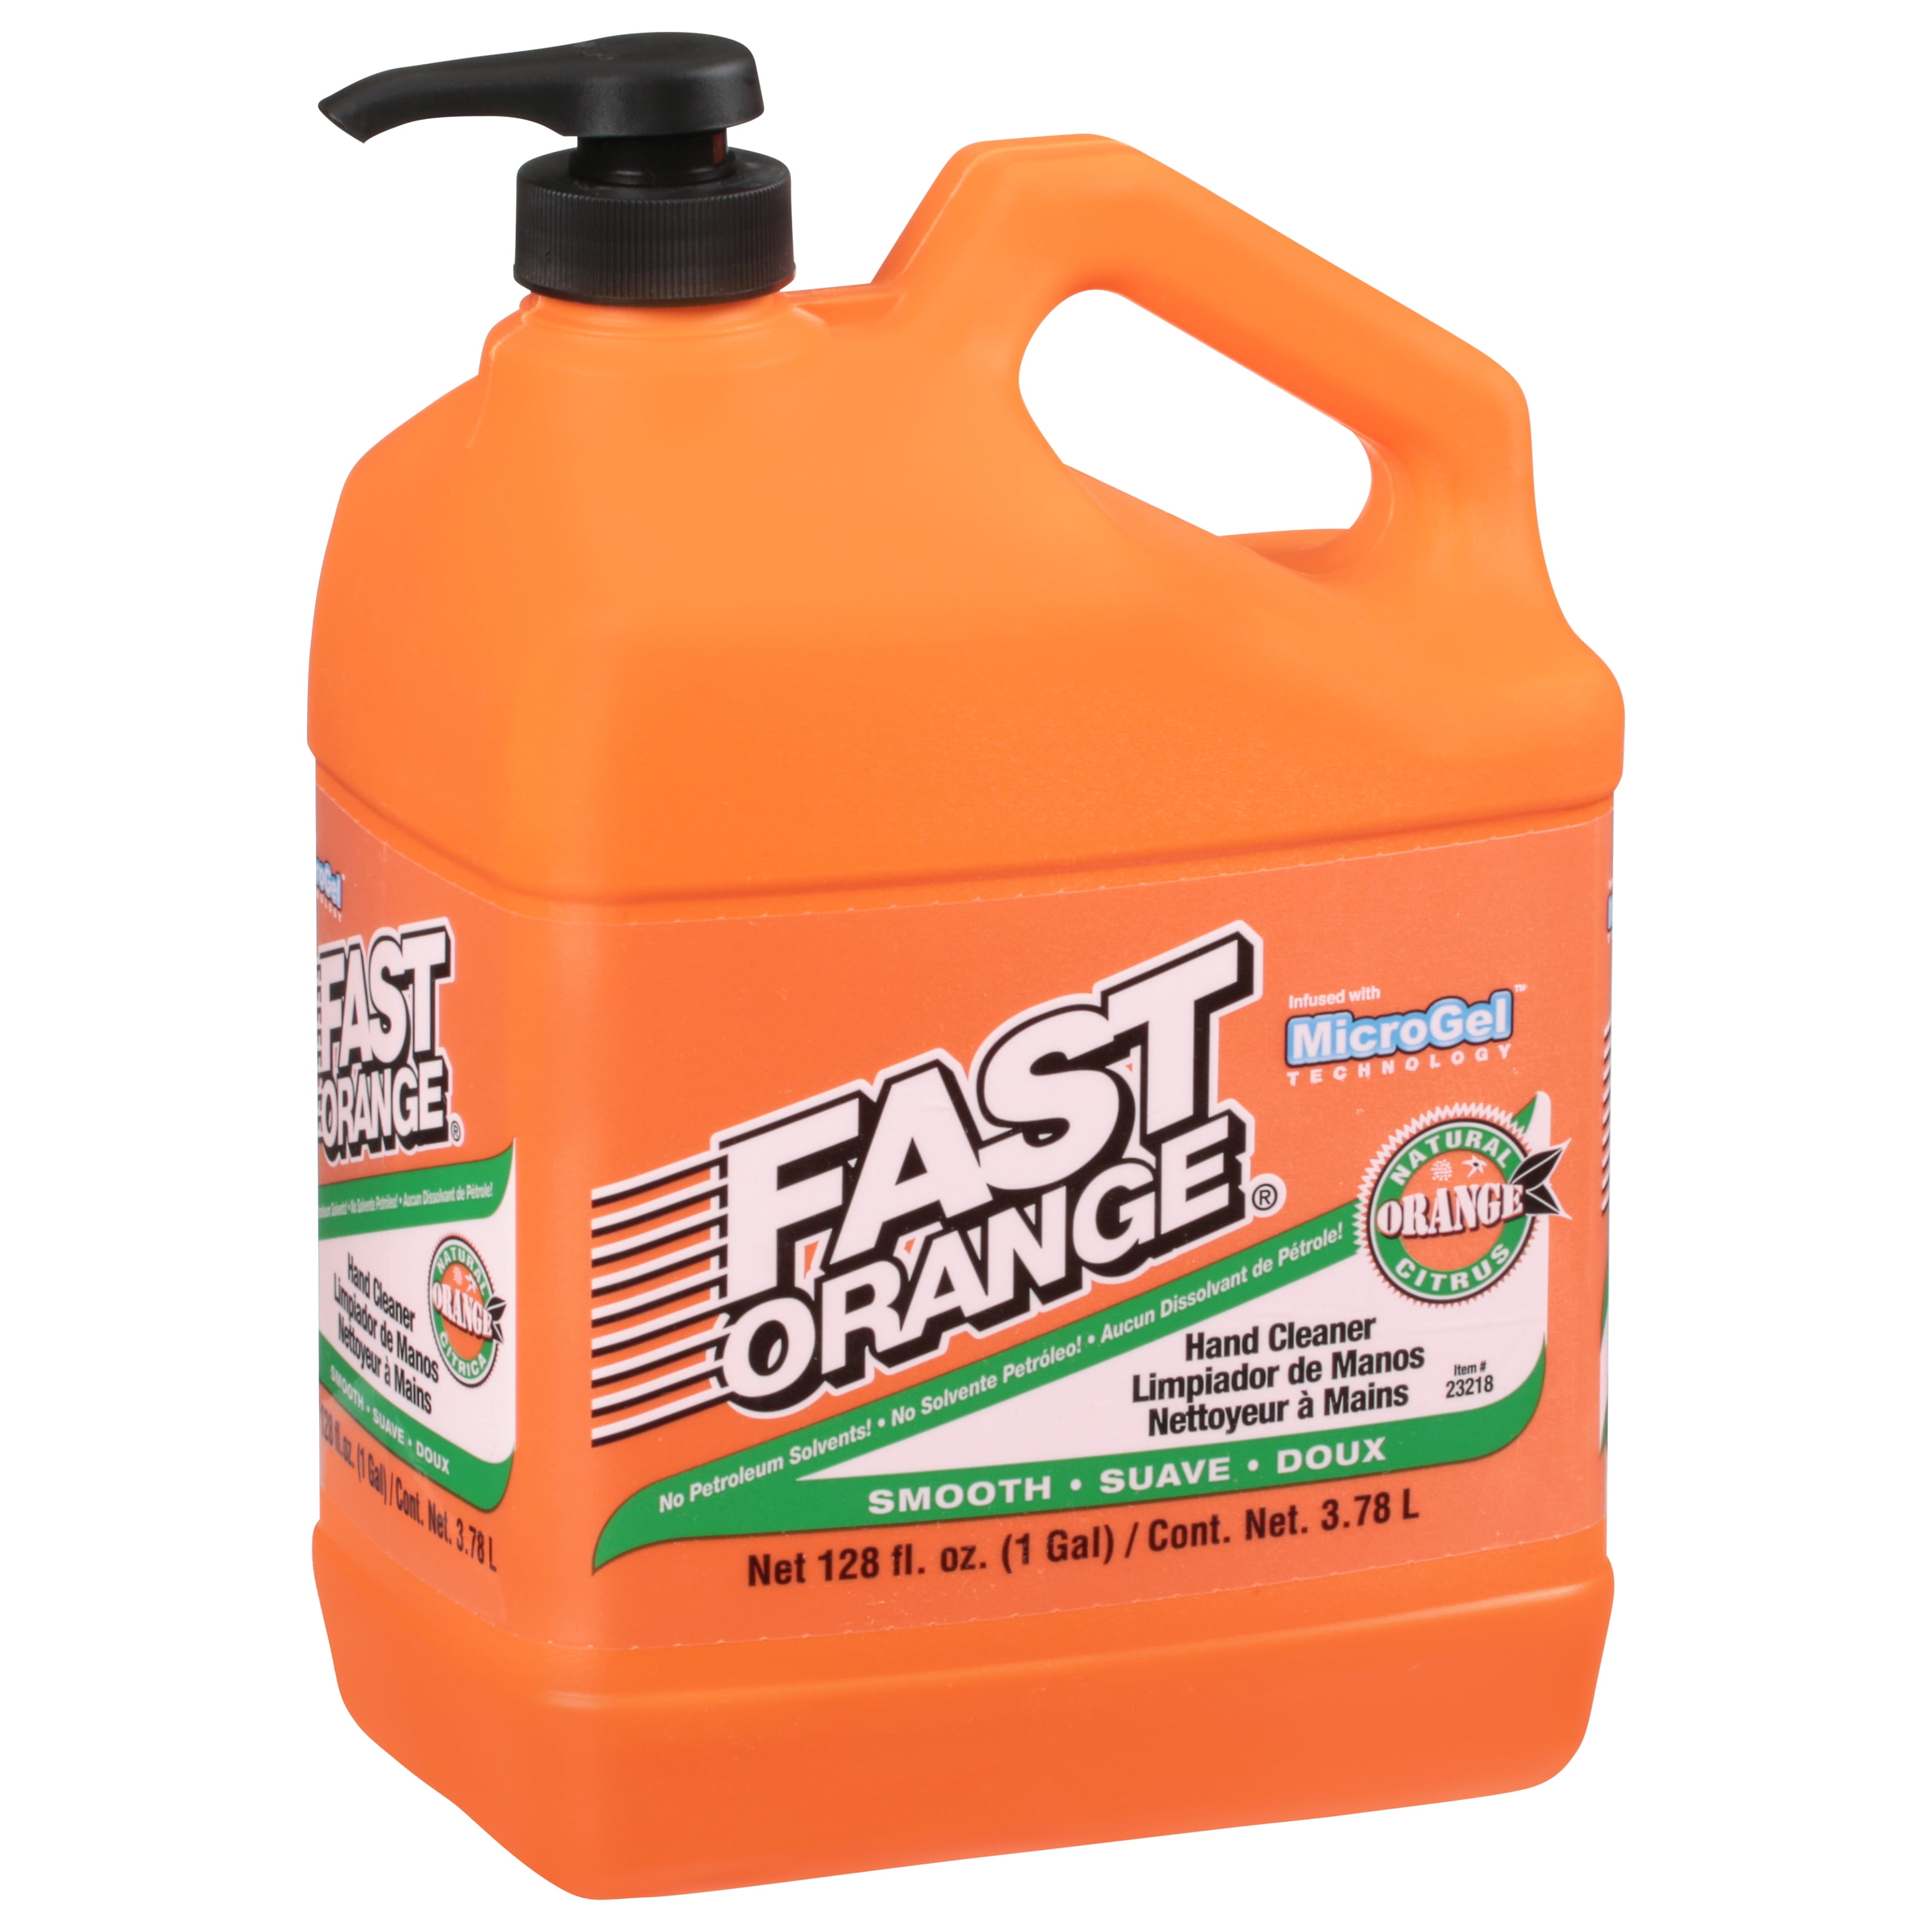 Fast Orange Smooth Lotion Hand Cleaner - Permatex Discontinued